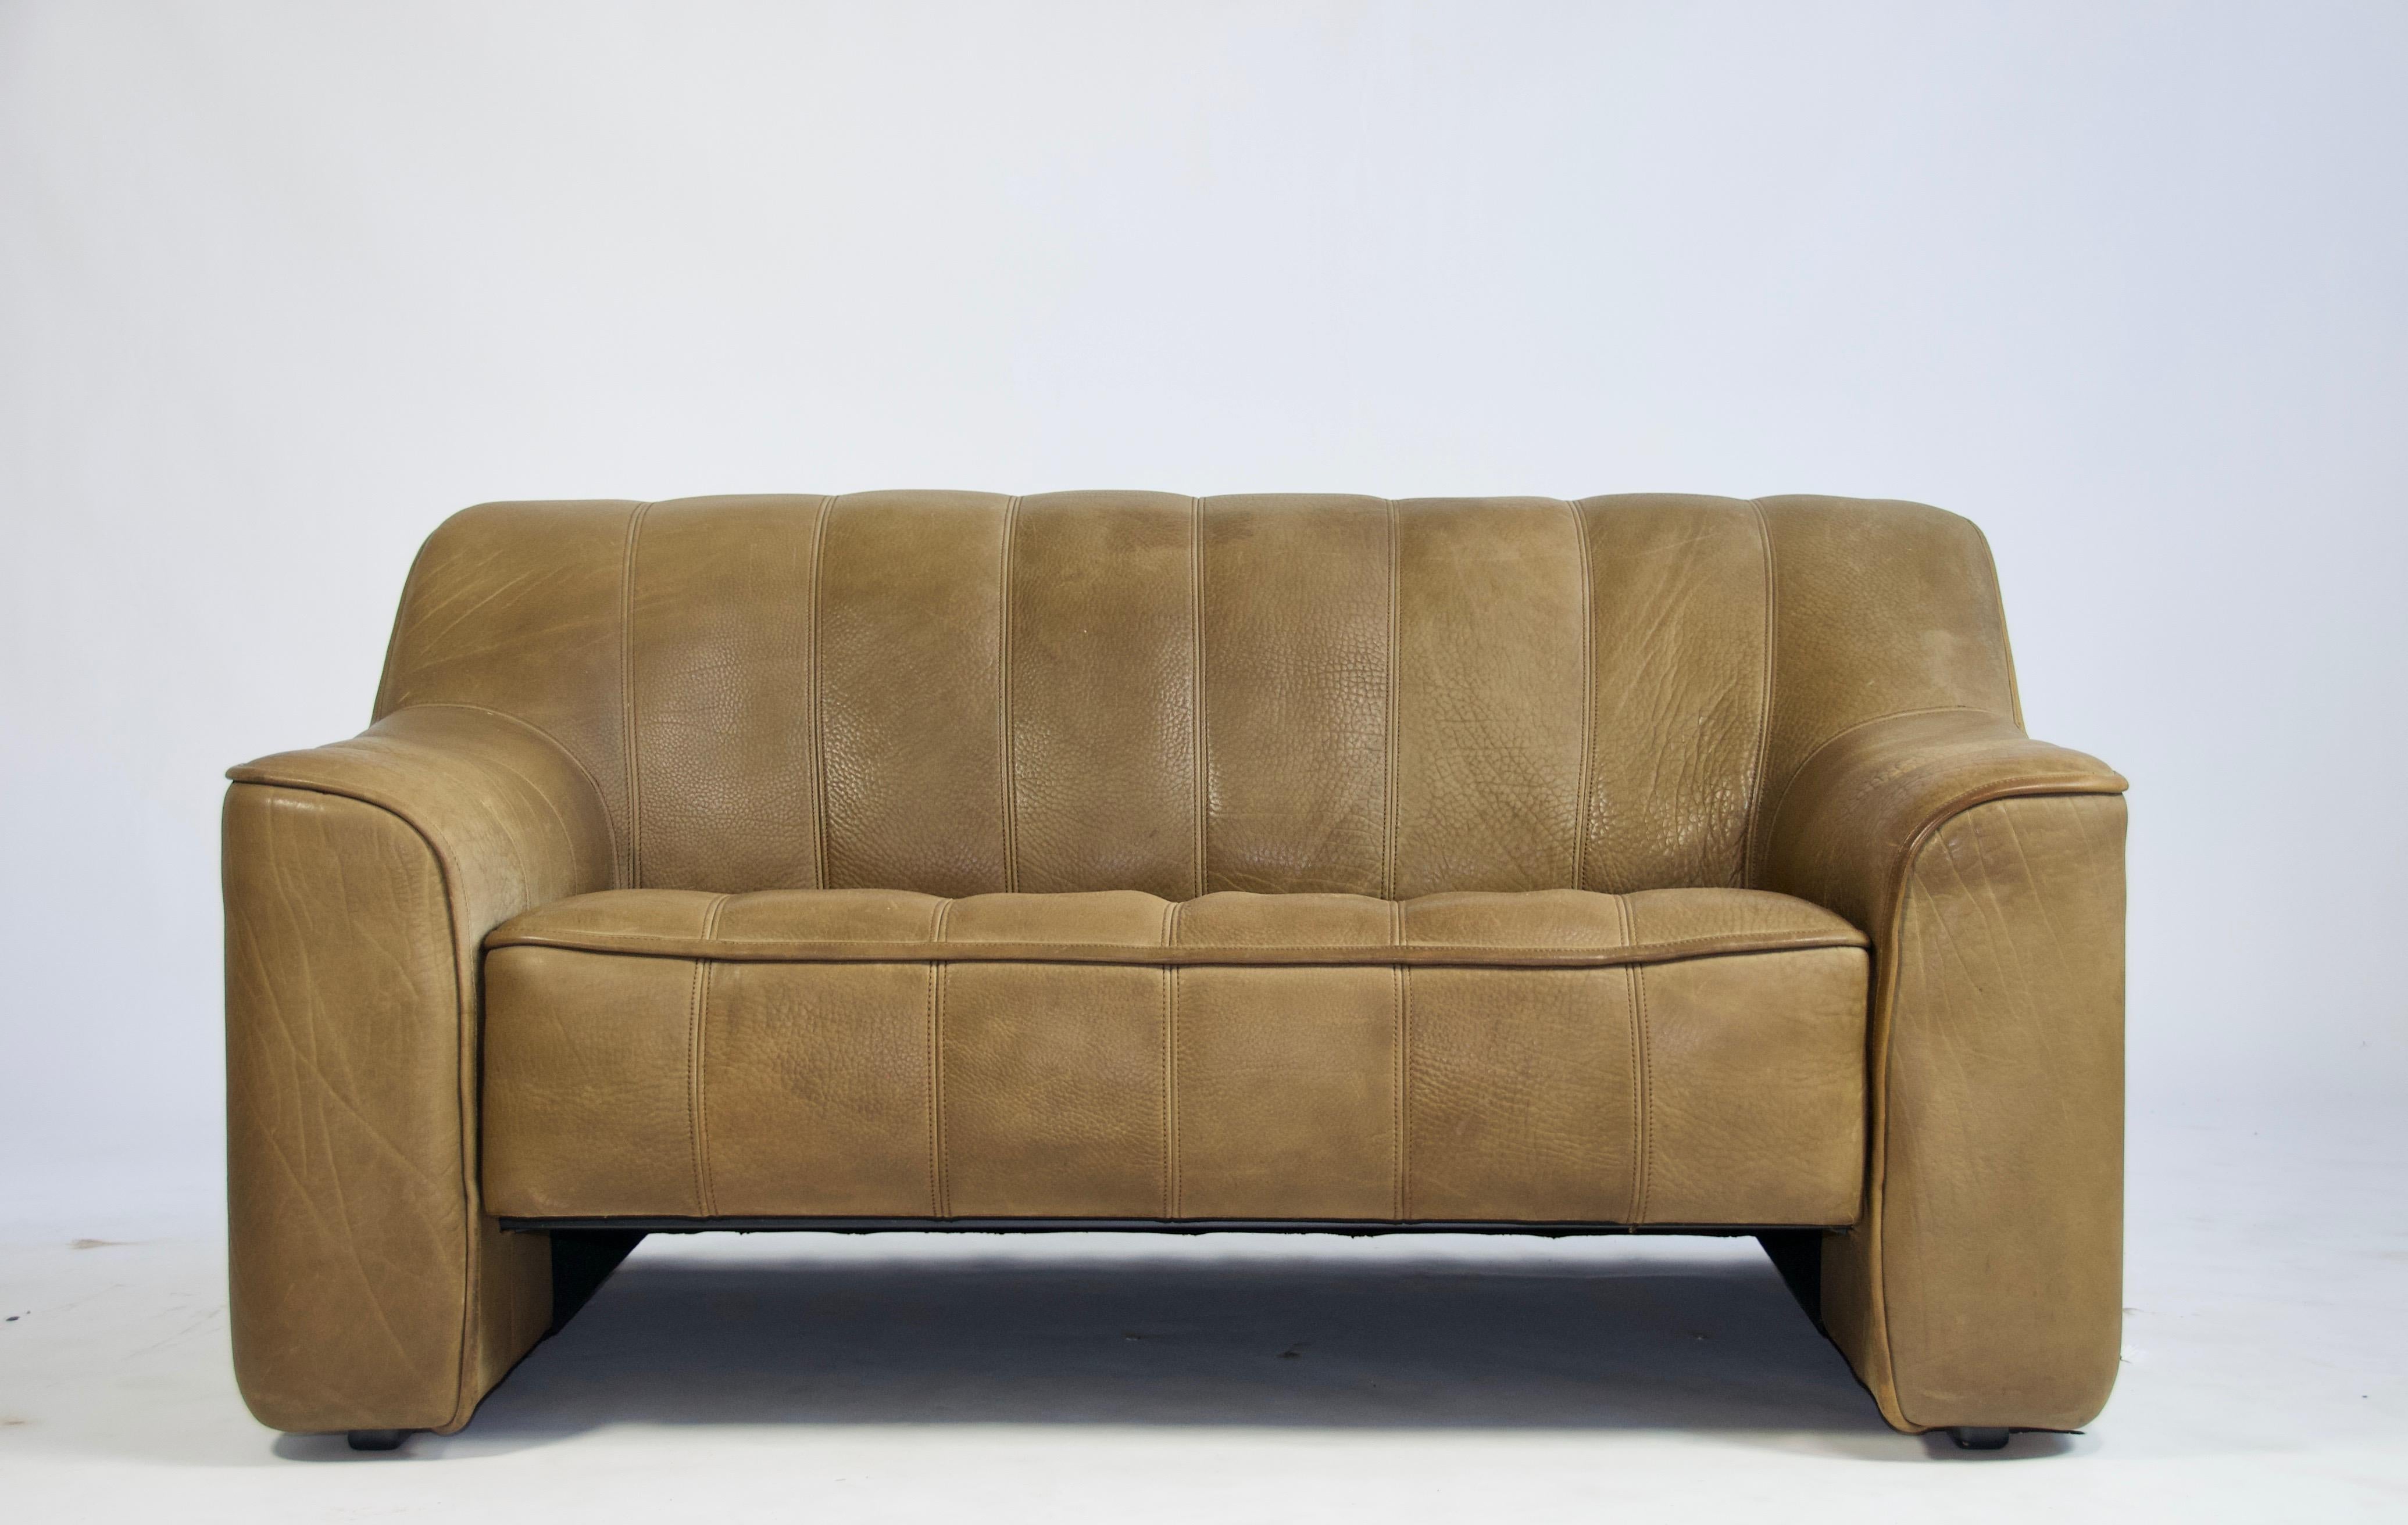 De Sede DS44 two-seat sofa. Upholstered in thick buffalo tan/brown leather. Two adjustable seat positions. Made in Switzerland.